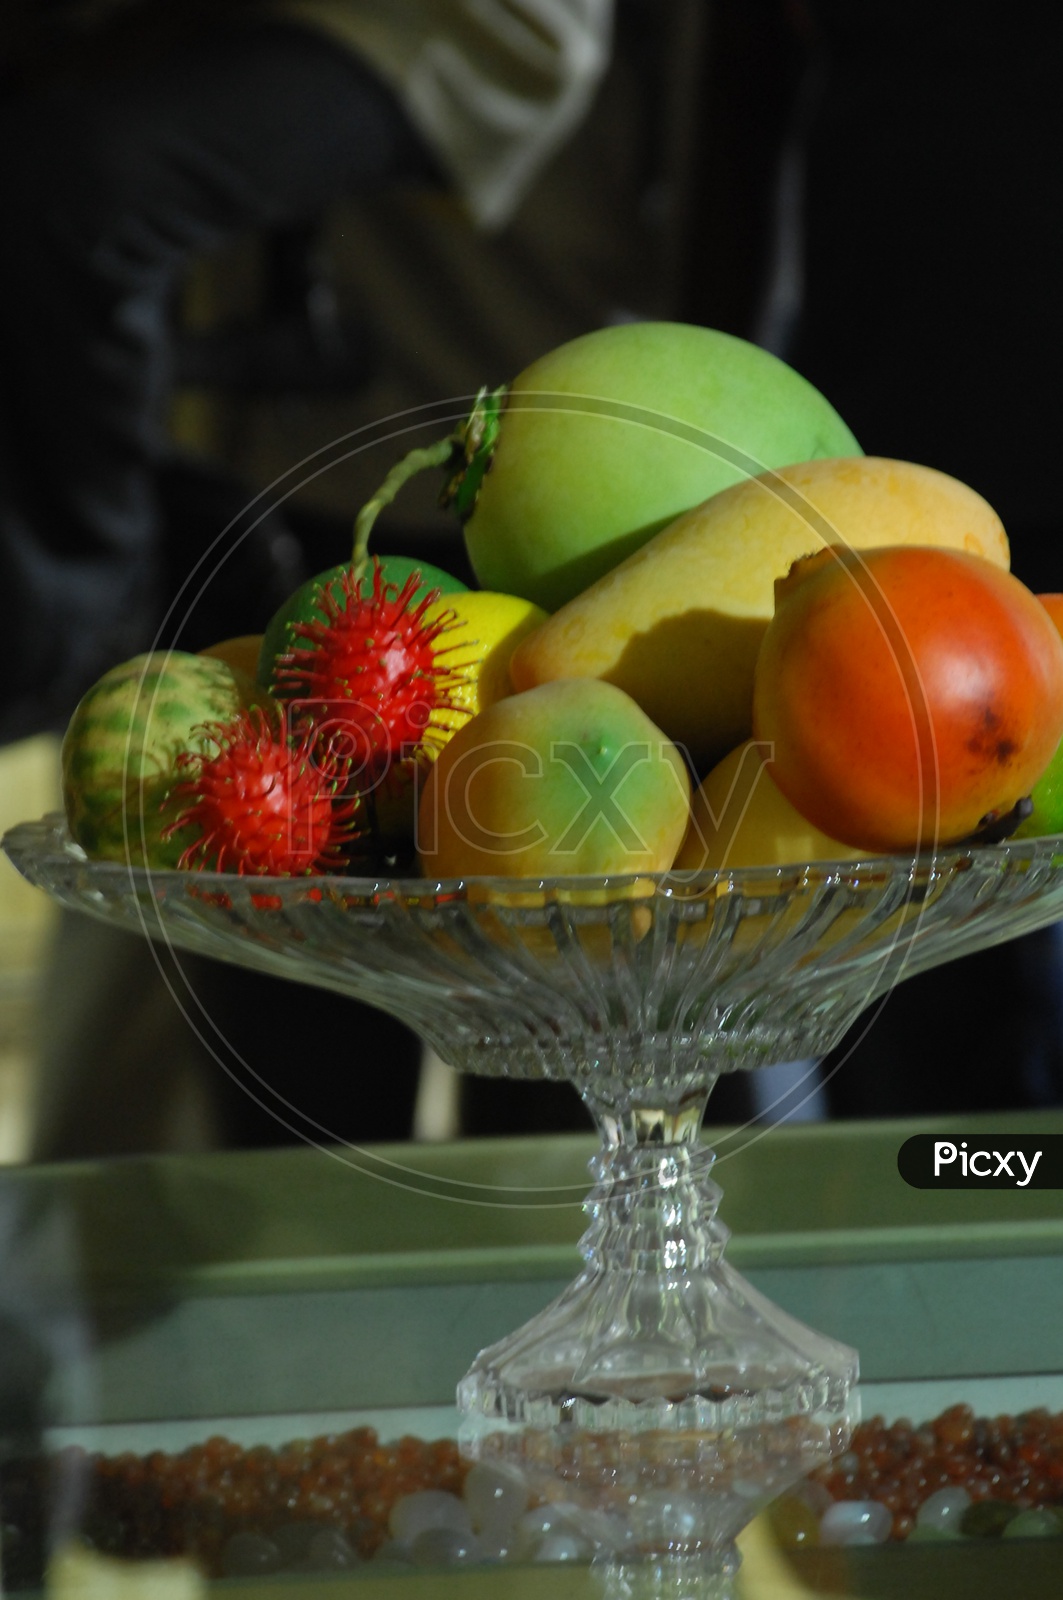 Photograph of Artificial Fruits in a glass bowl